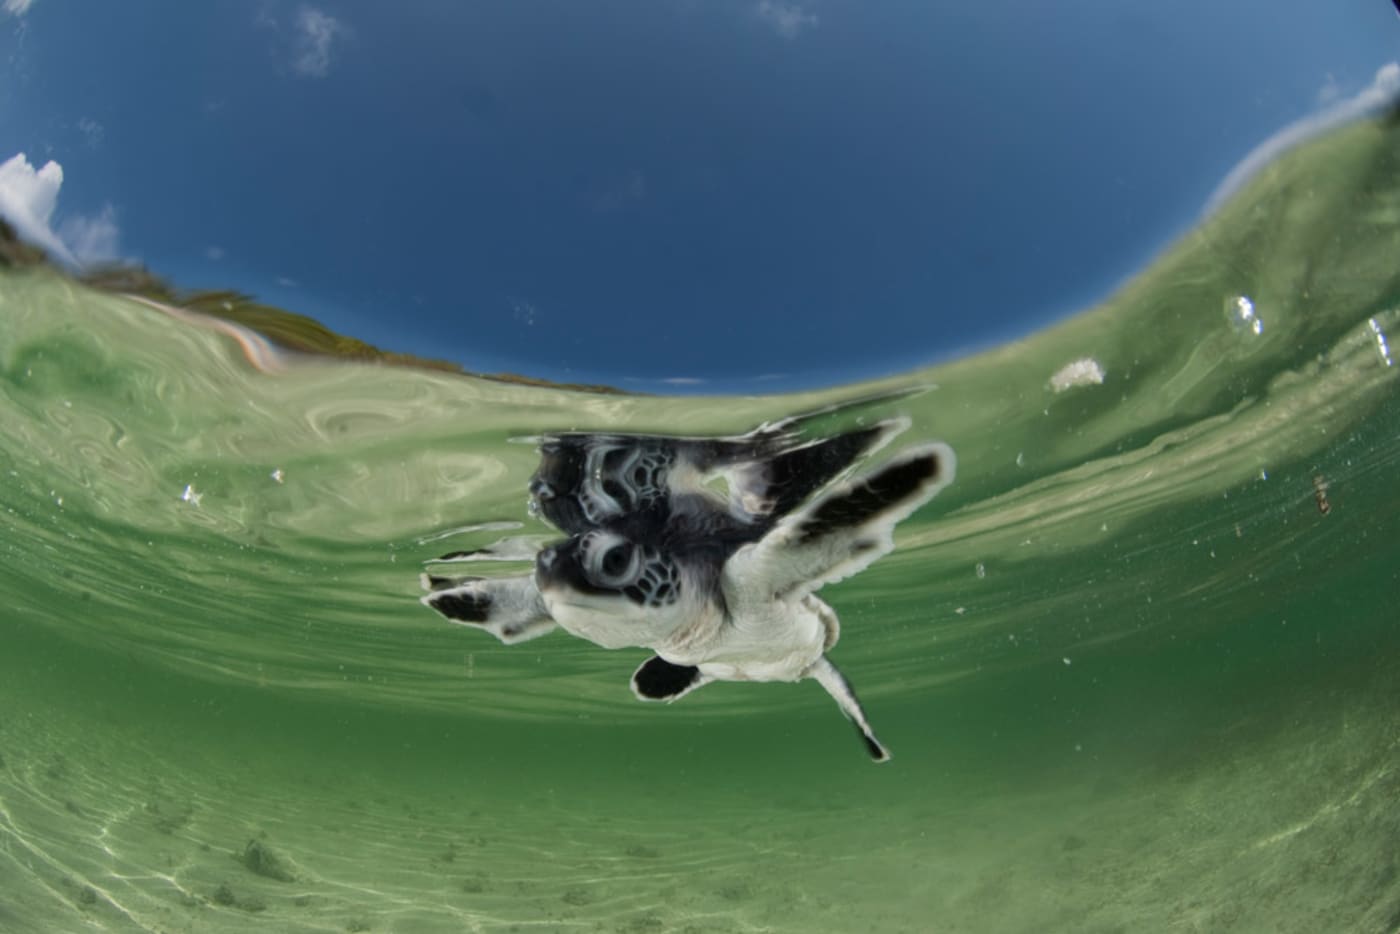 A baby green sea turtle swims on the water surface